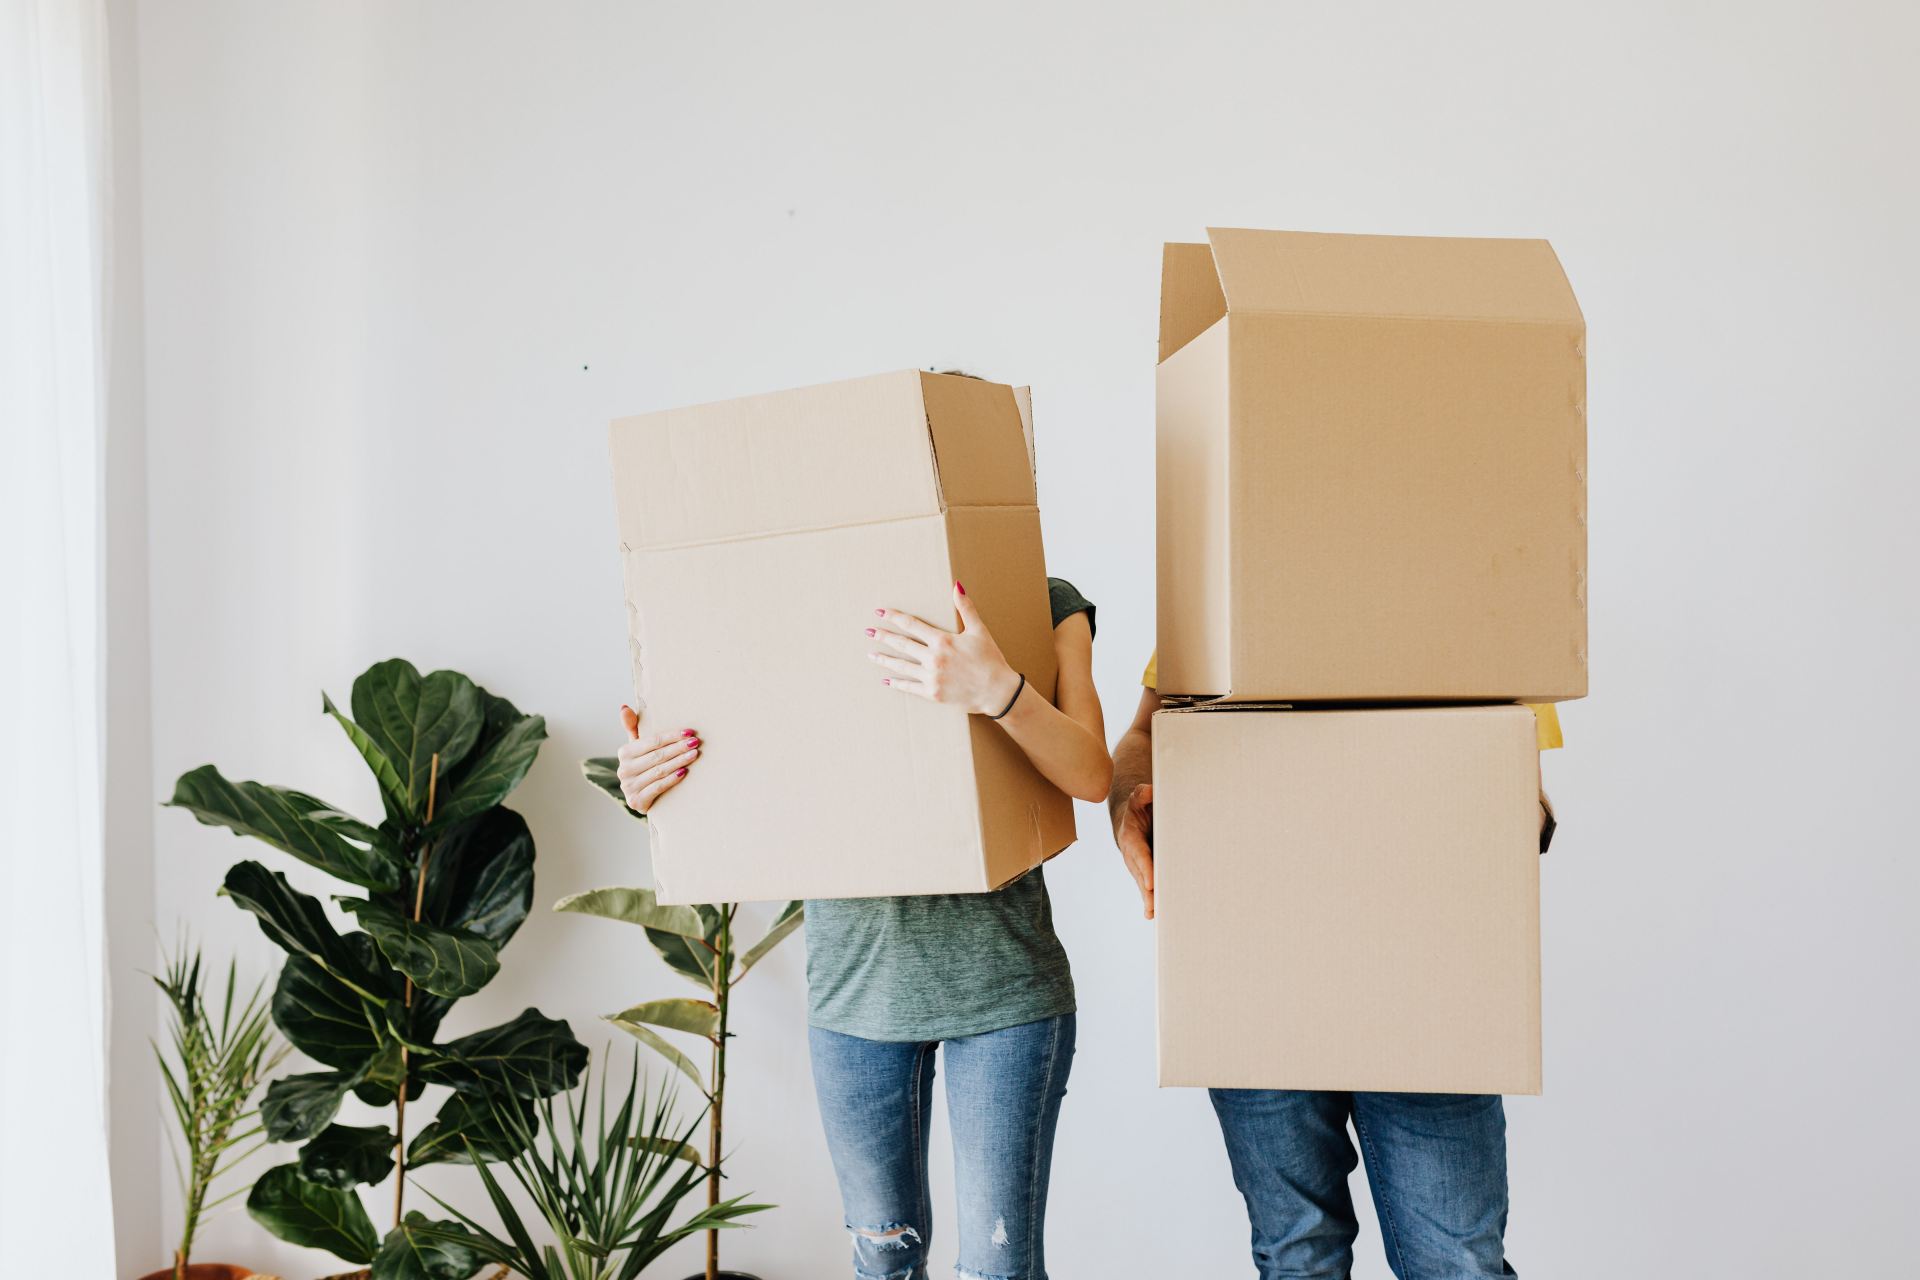 Two people holding large moving boxes. Their faces are obscured.